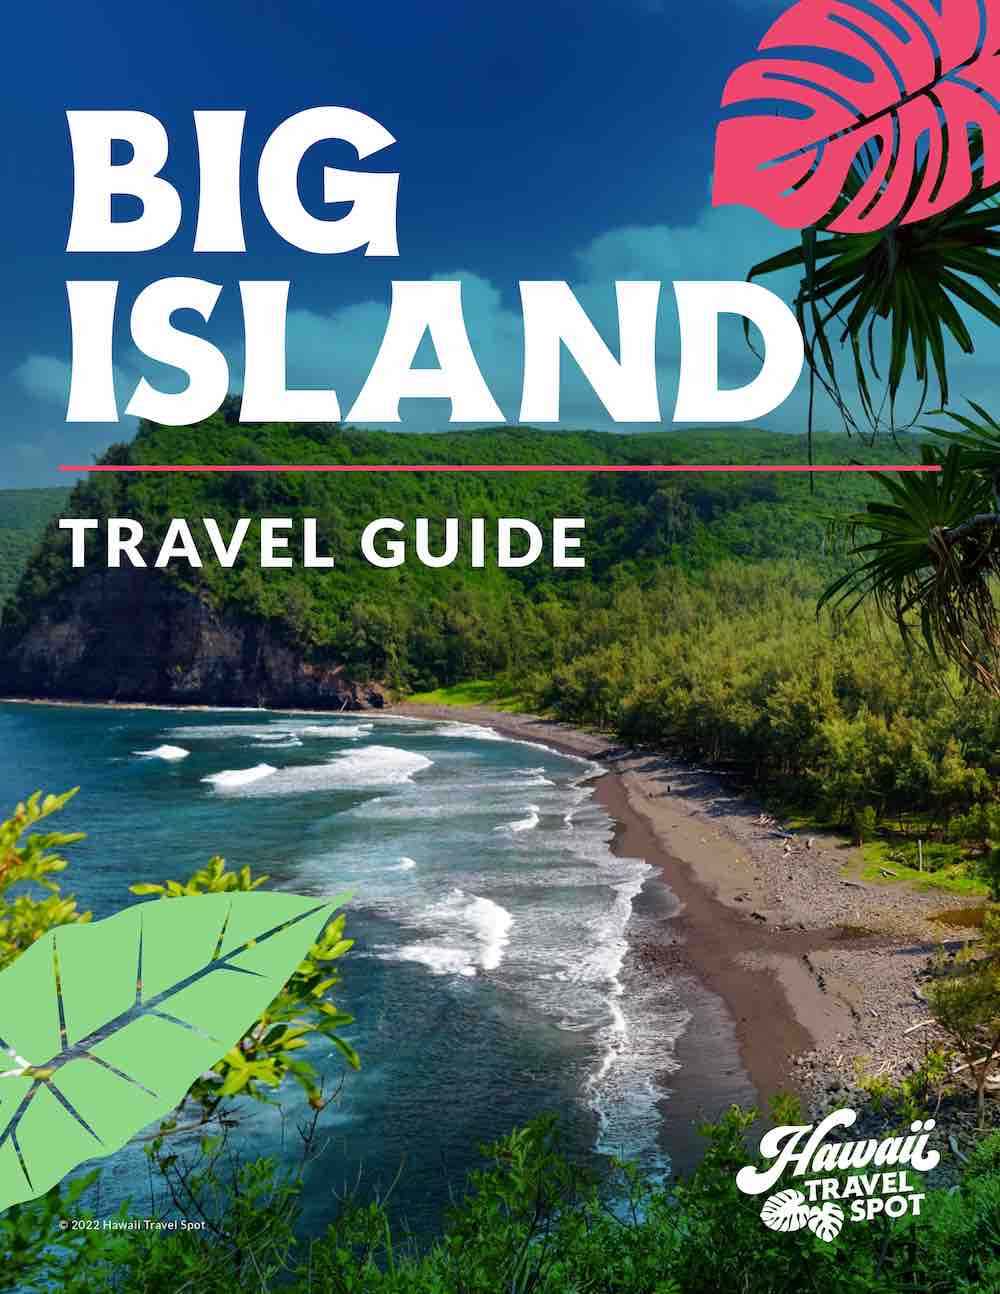 Check out this Big Island Travel Guide and 7 Day Big Island Itinerary by top Hawaii blog Hawaii Travel Spot